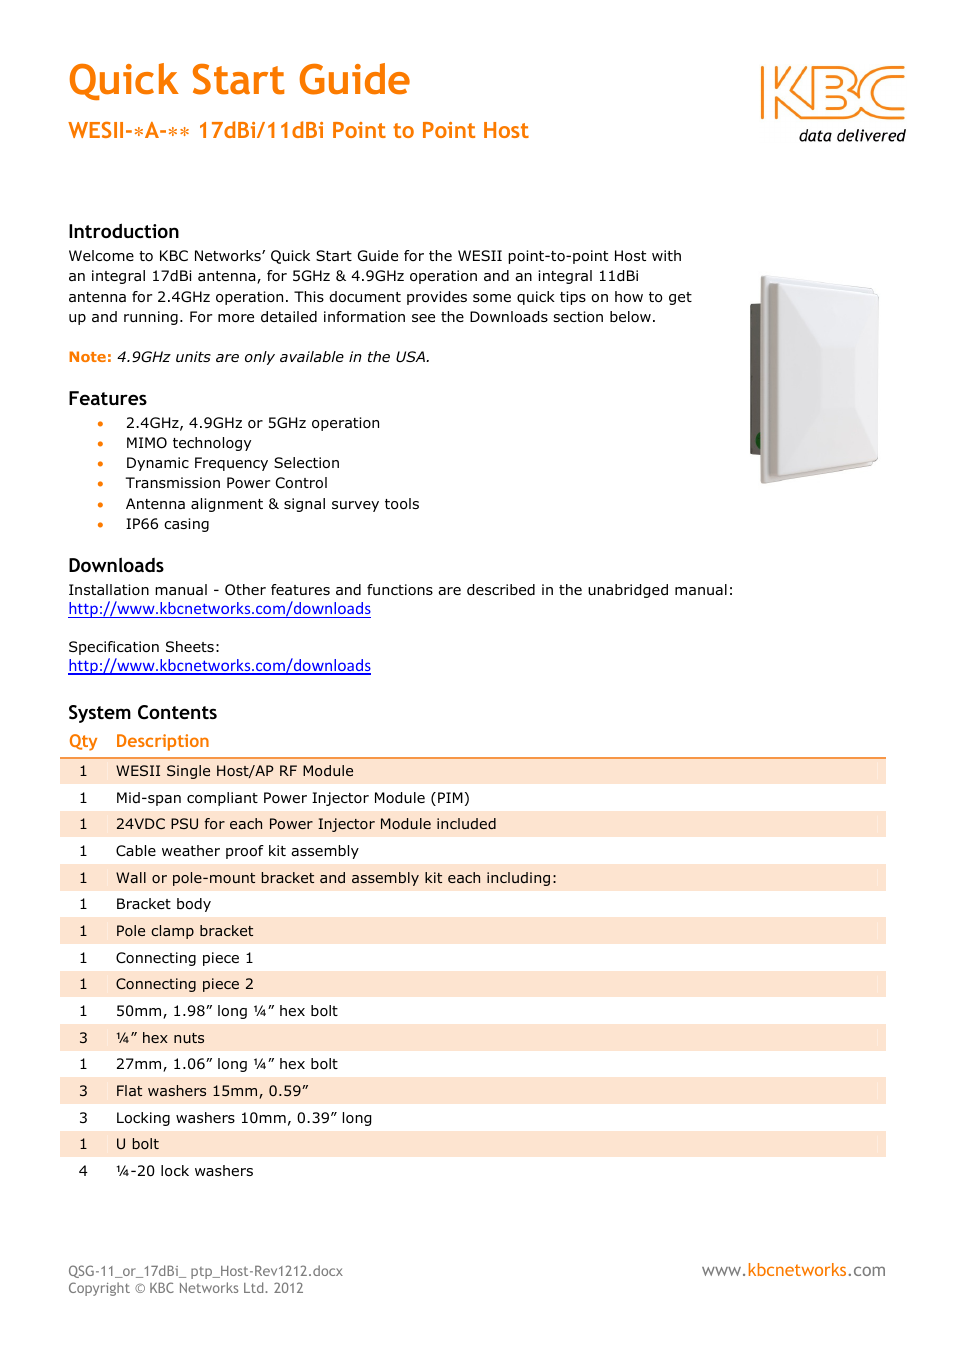 WESII 9dBi Point-to-Point / Point-to-Multipoint PoE Host